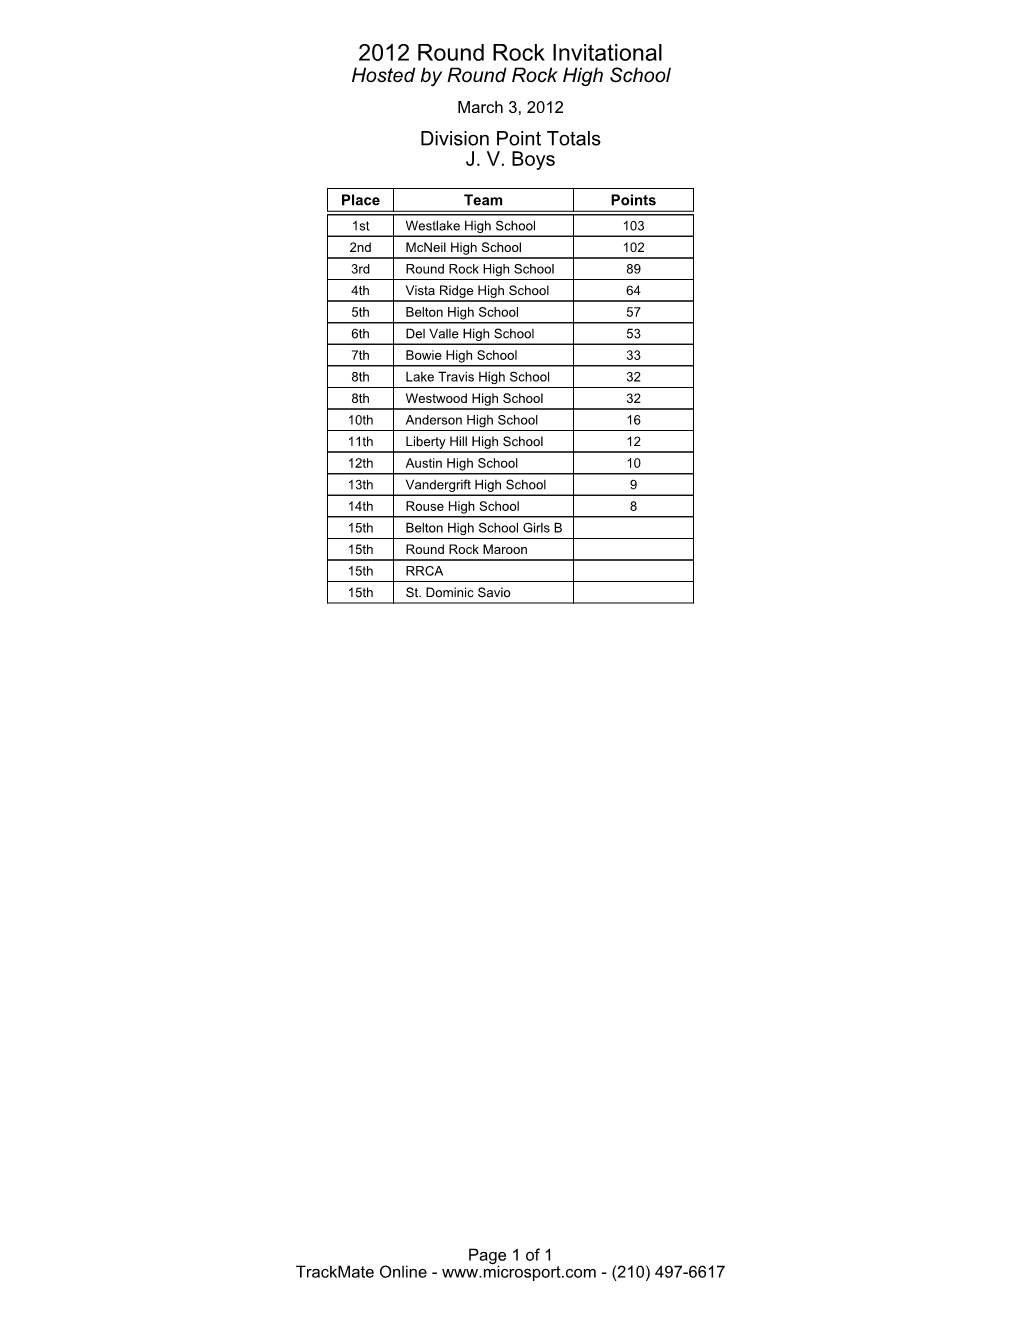 2012 Round Rock Invitational Hosted by Round Rock High School March 3, 2012 Division Point Totals J